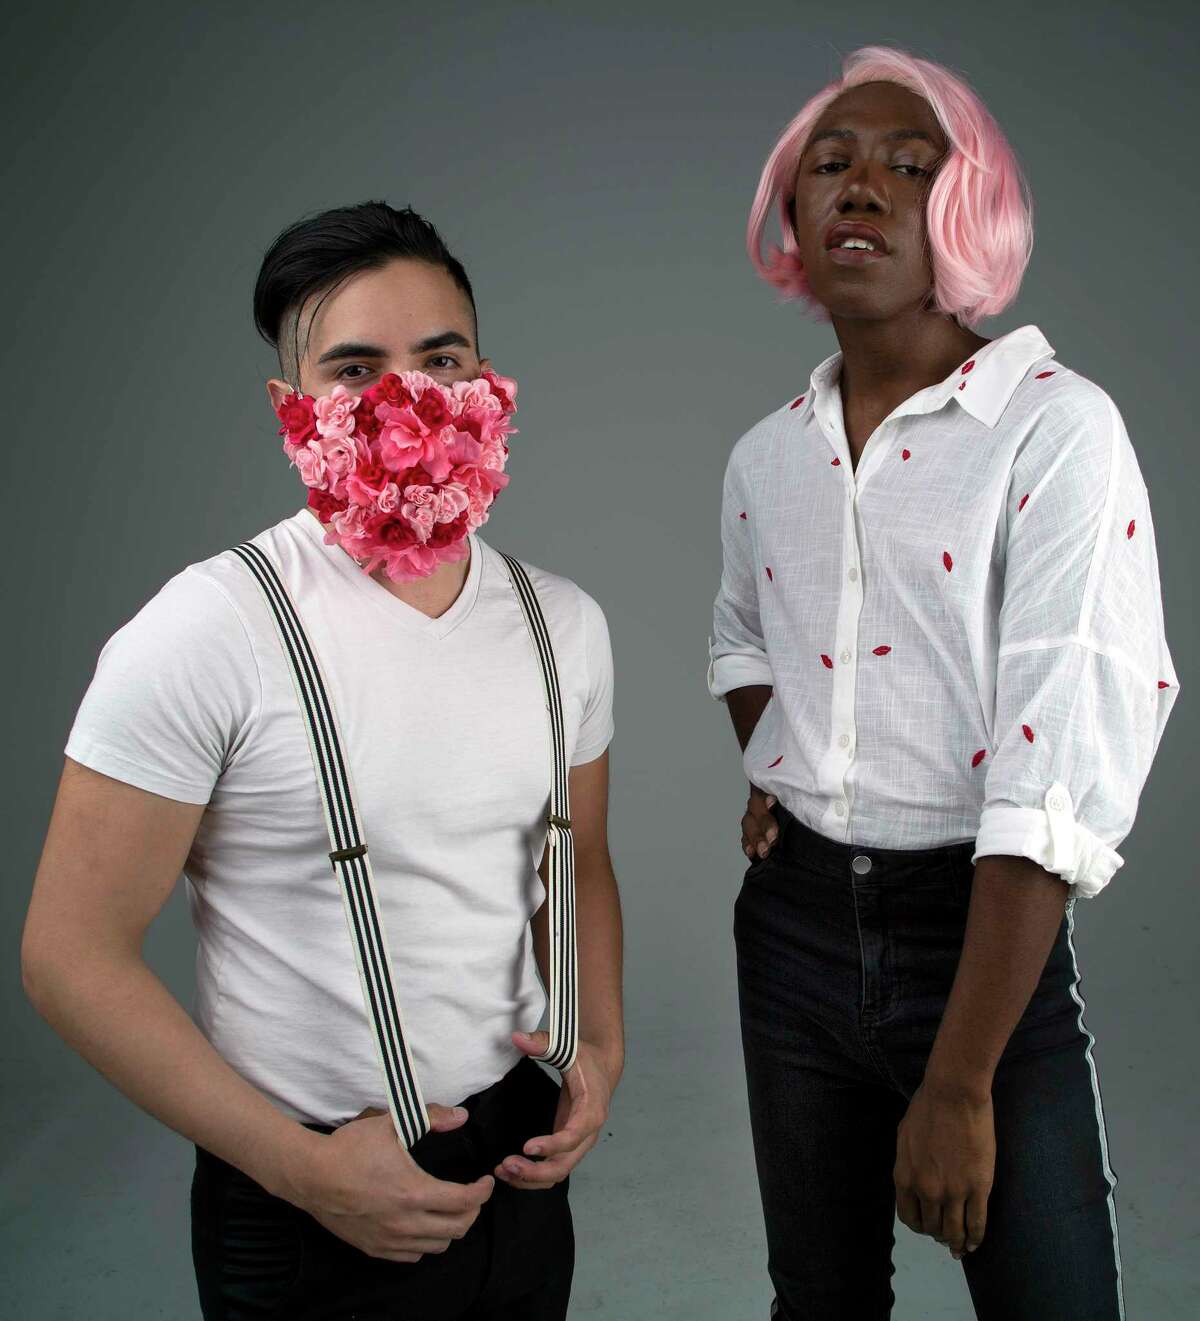 Luis Cerda, left, and Stoo Gogo form the new Houston pop duo Bling St.